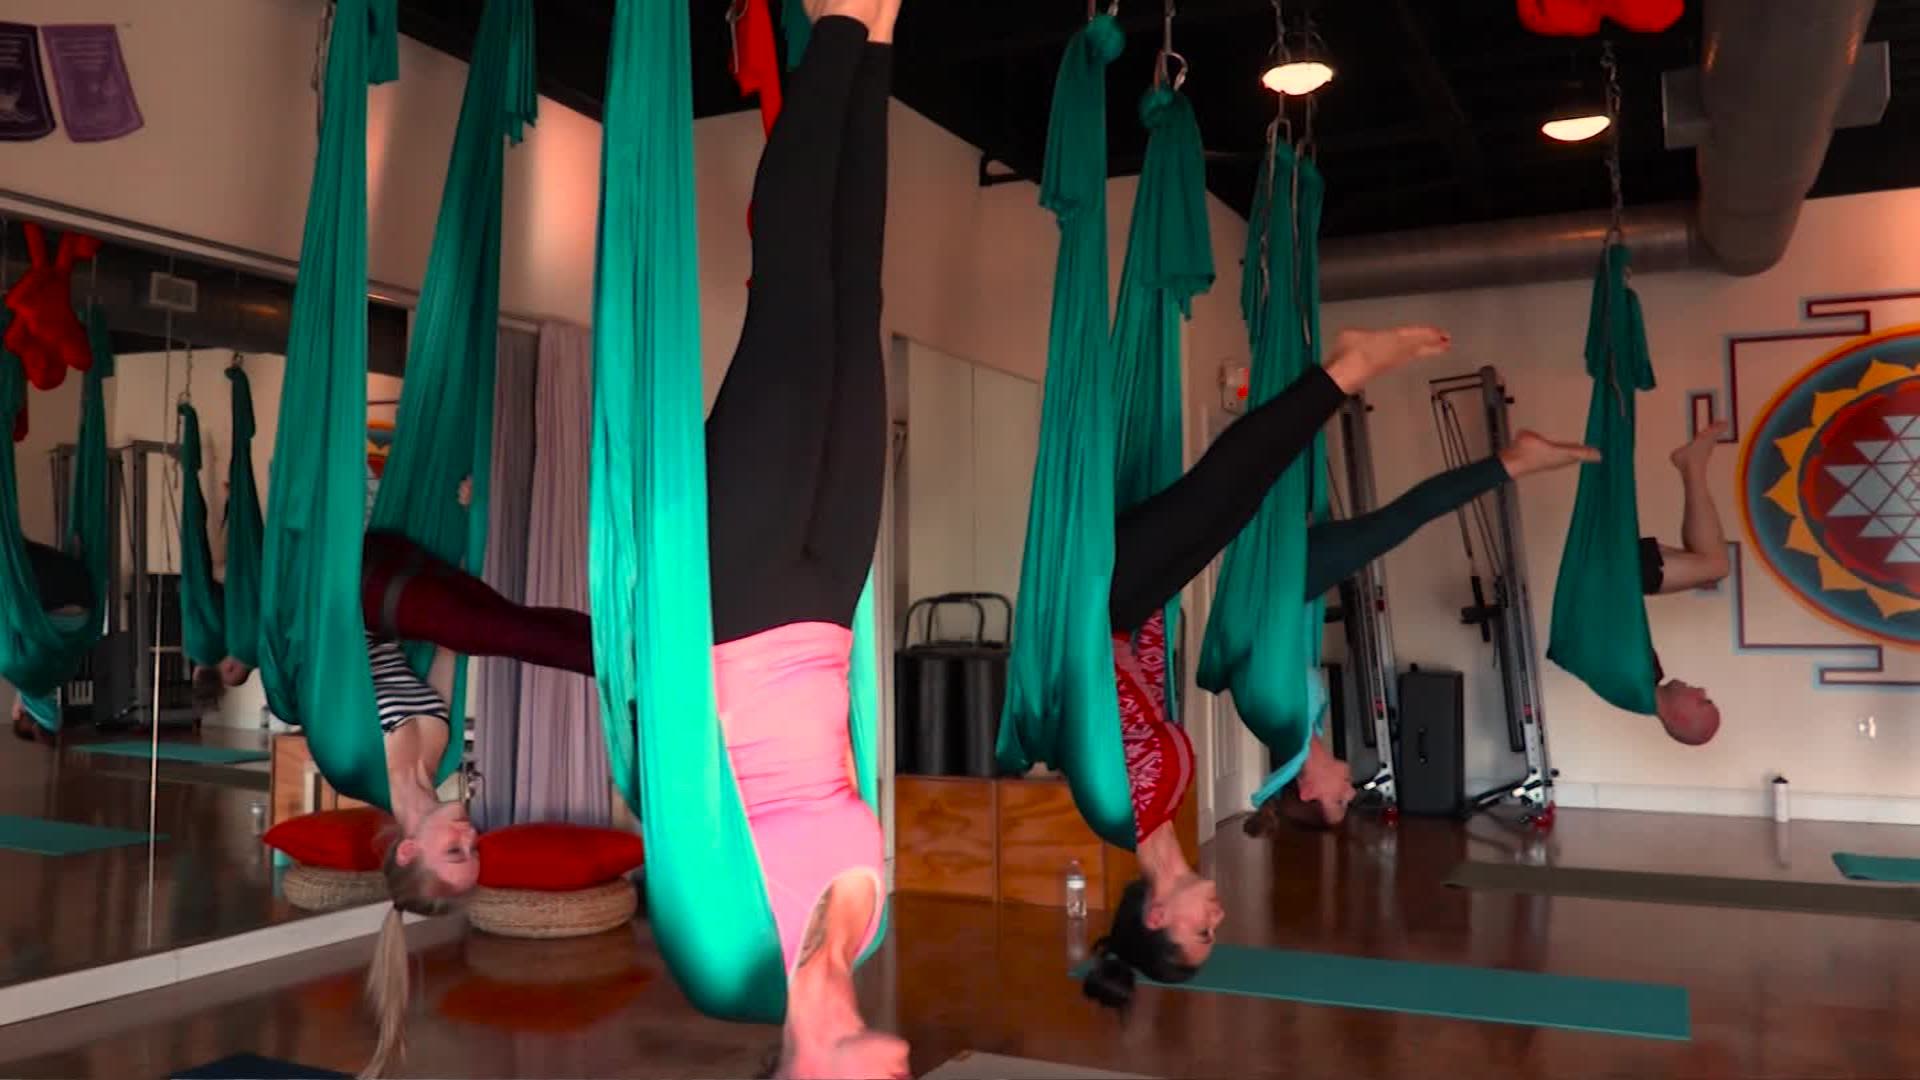 Yoga trapeze for beginner  Elevate Your Yoga Practice » Yoga Props